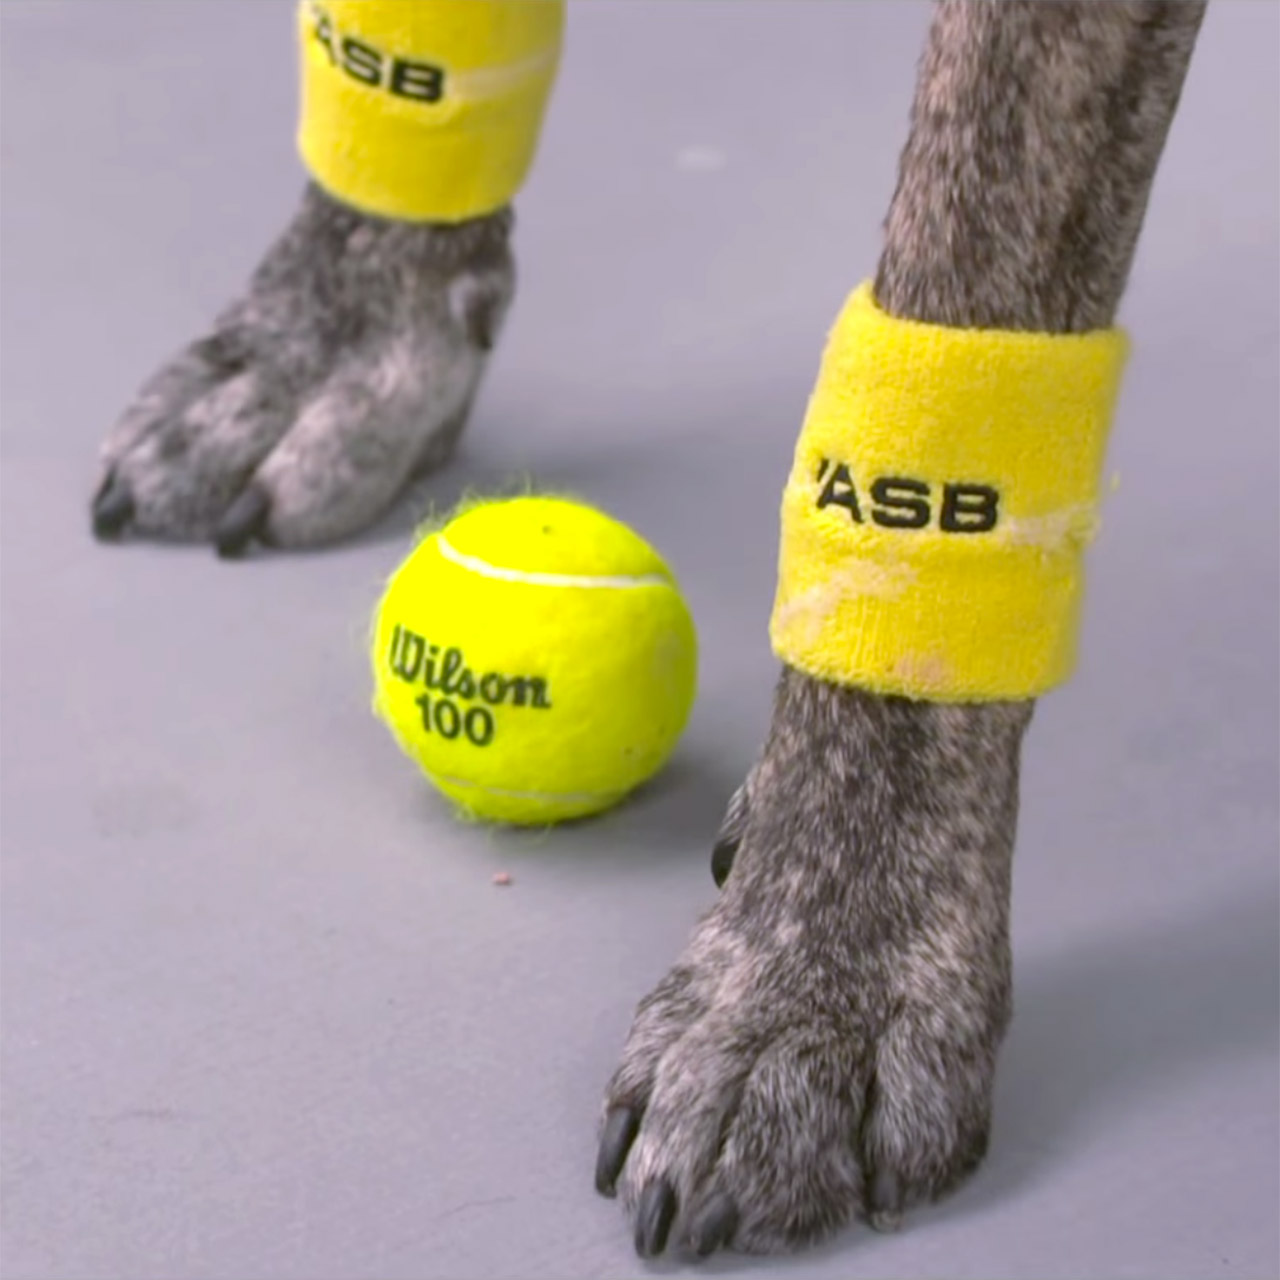 Venus Williams adores the ball dogs at the ASB Classic in New Zealand